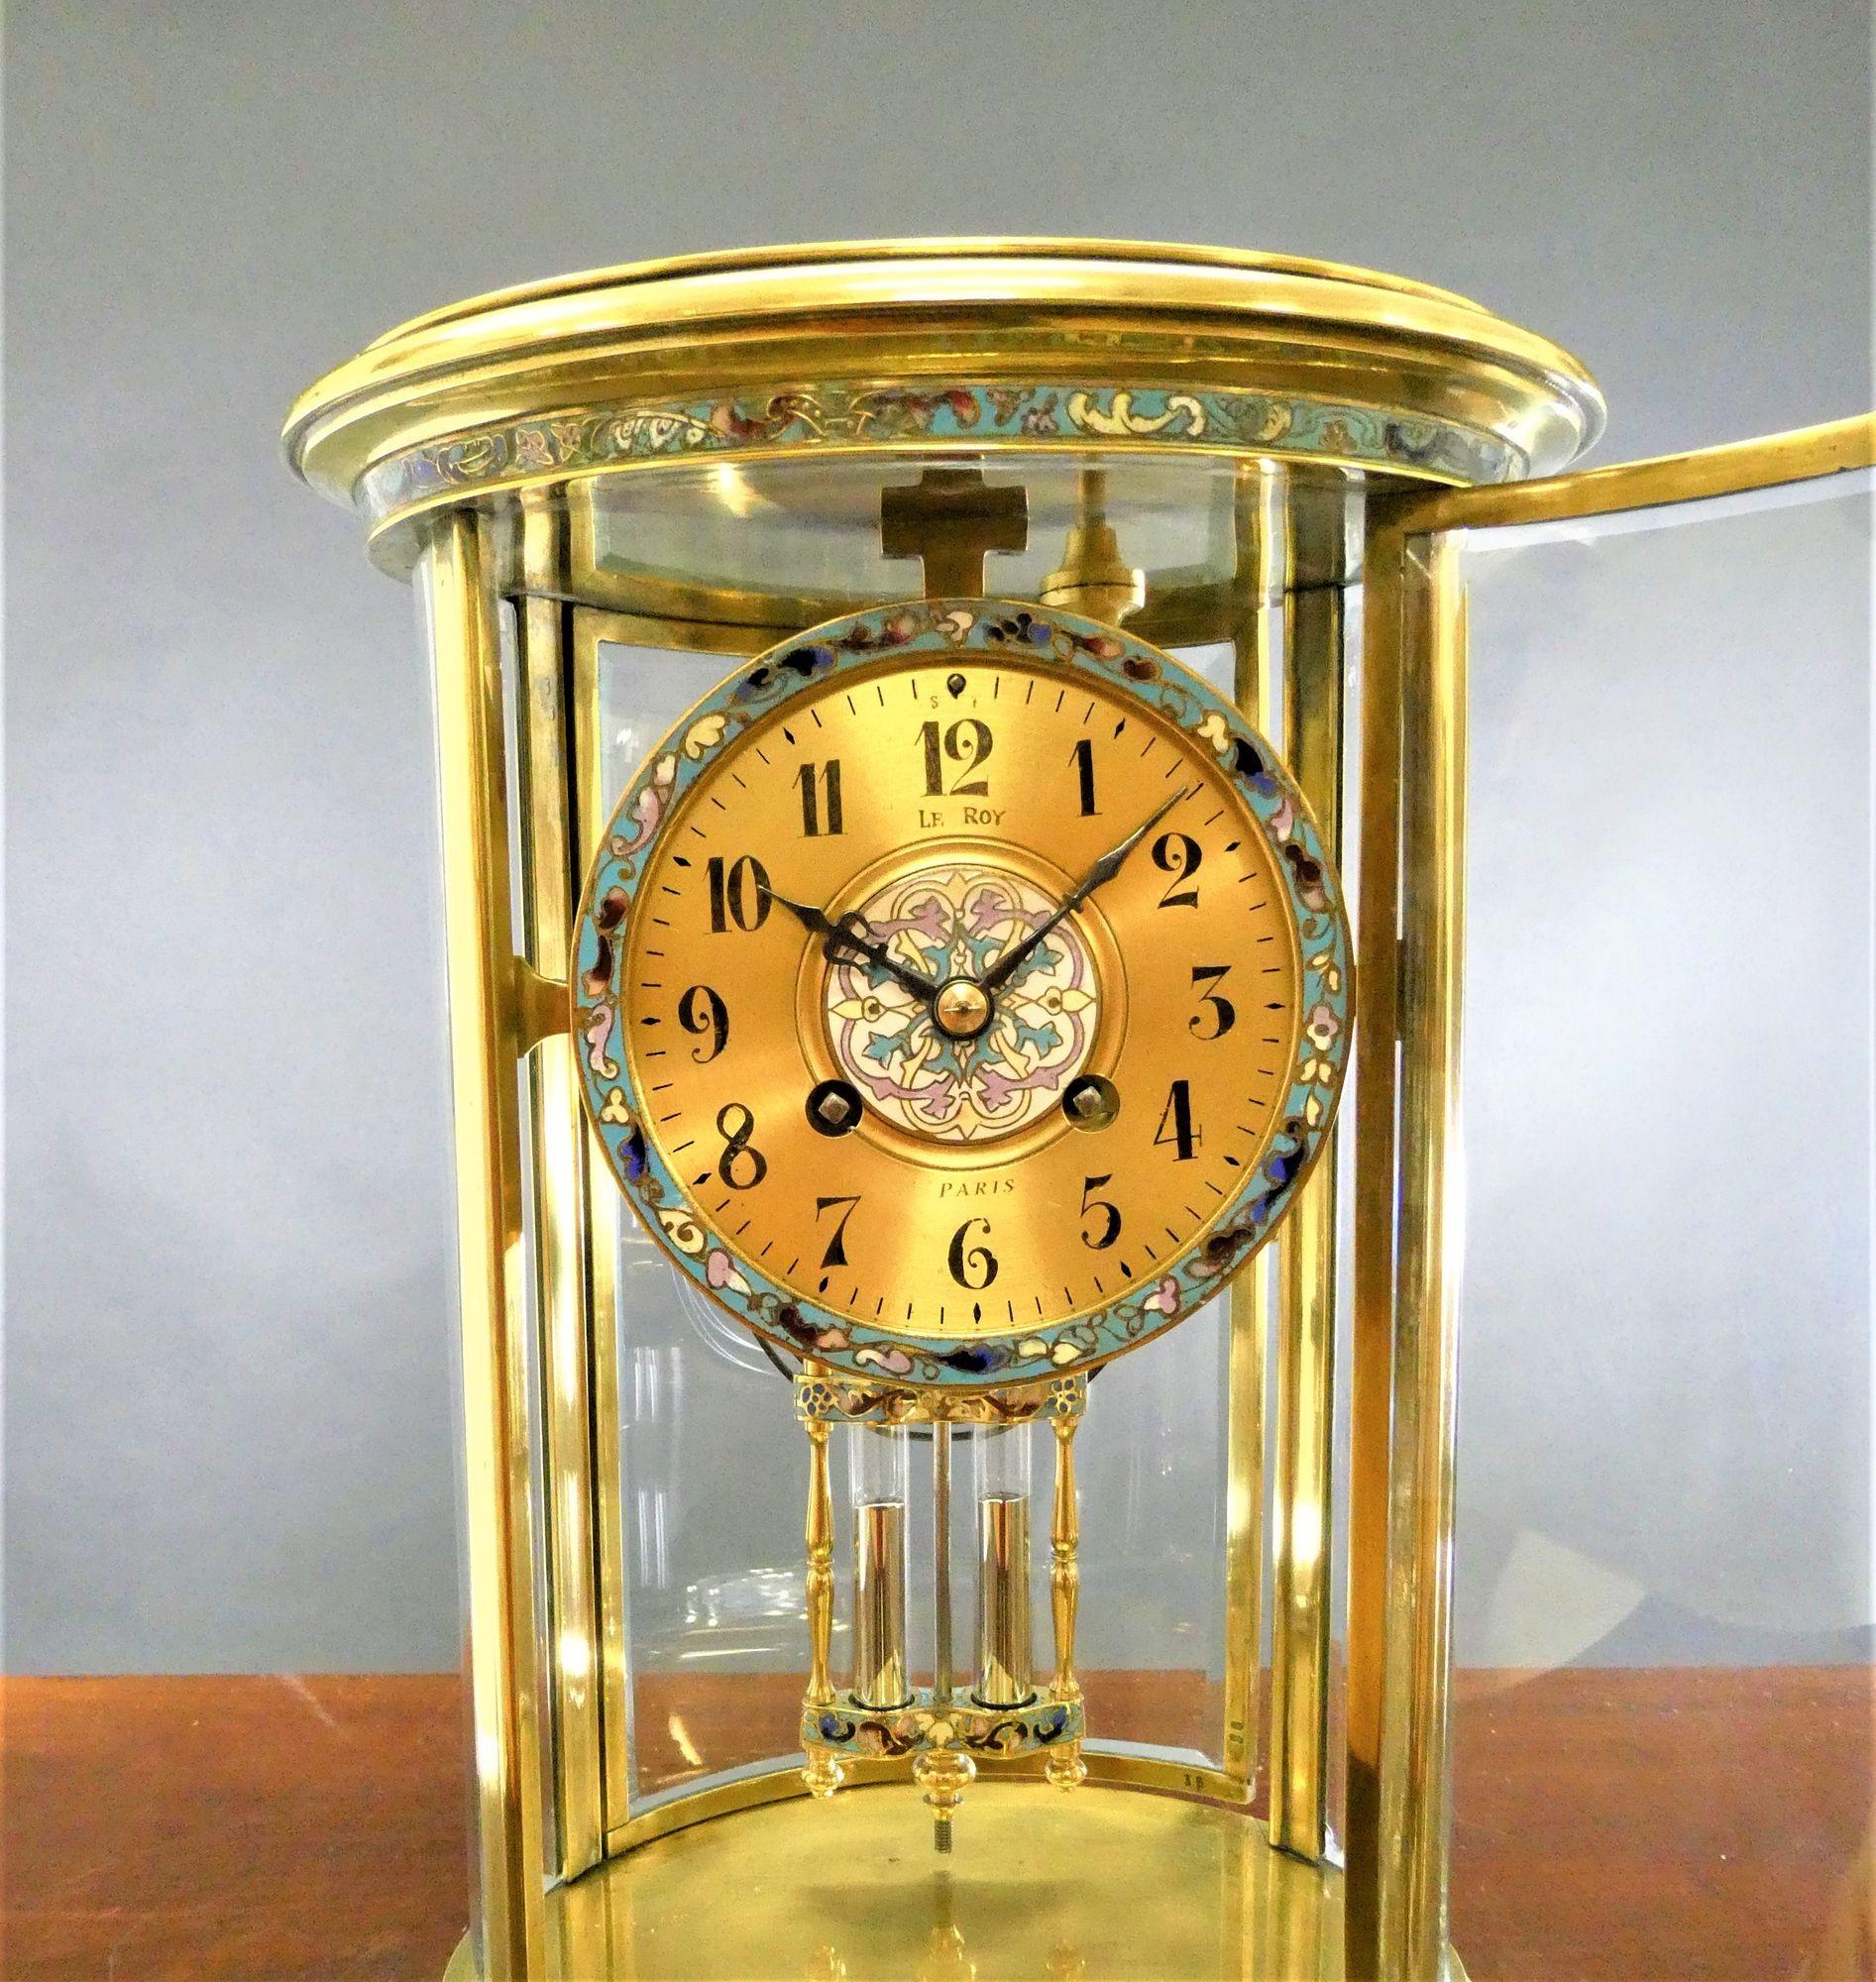 French Oval Four Glass Mantel Clock with Champleve Decoration, Le Roy, Paris In Good Condition For Sale In Norwich, GB